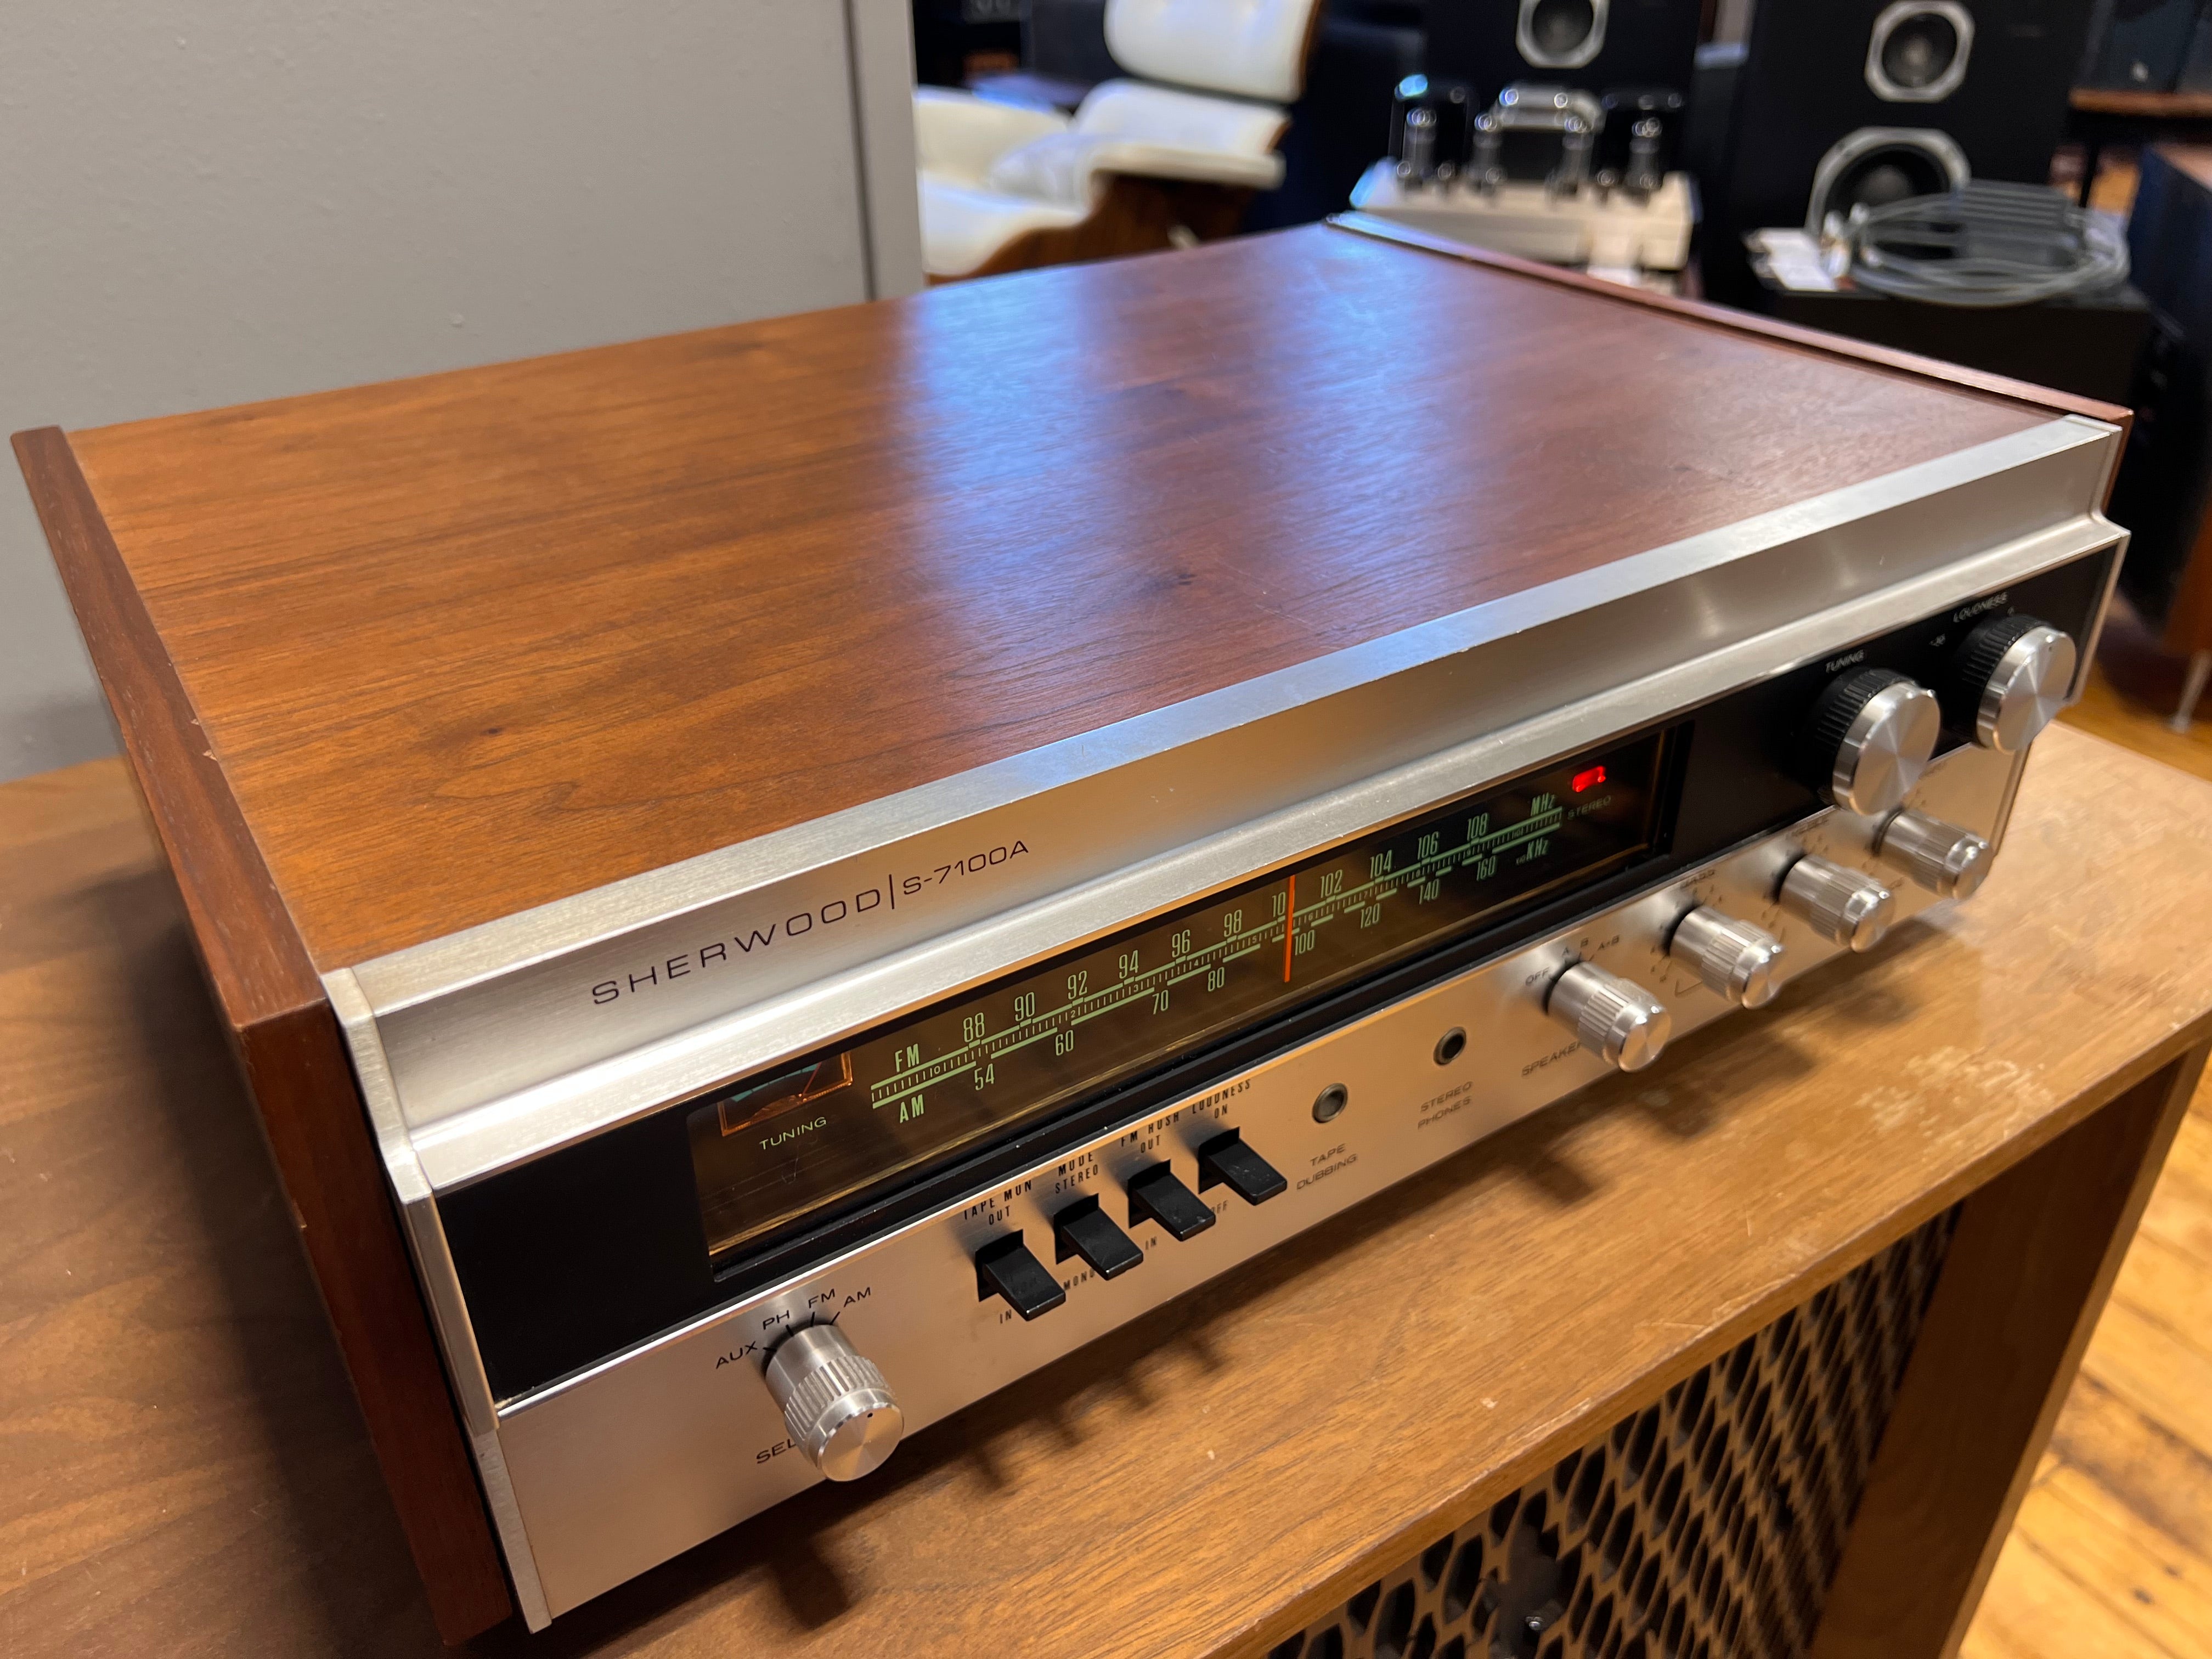 Sherwood S-7100A Vintage Solid State Receiver